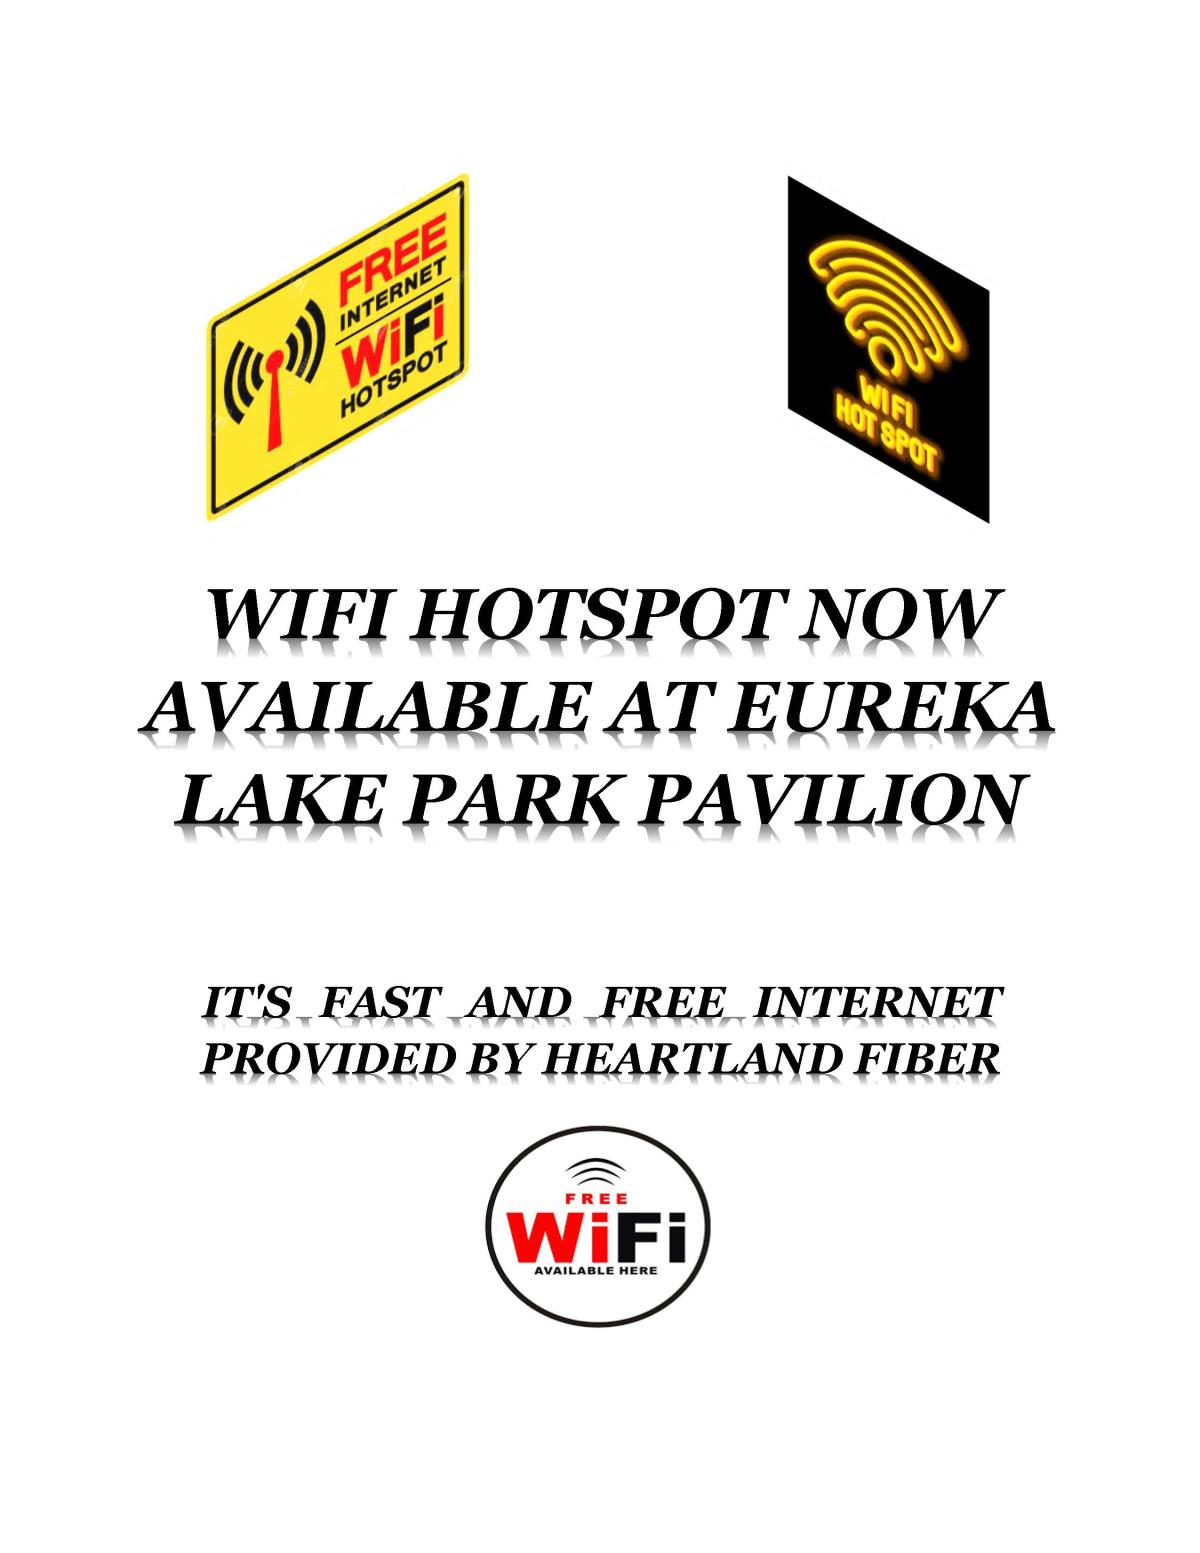 Wifi at the park